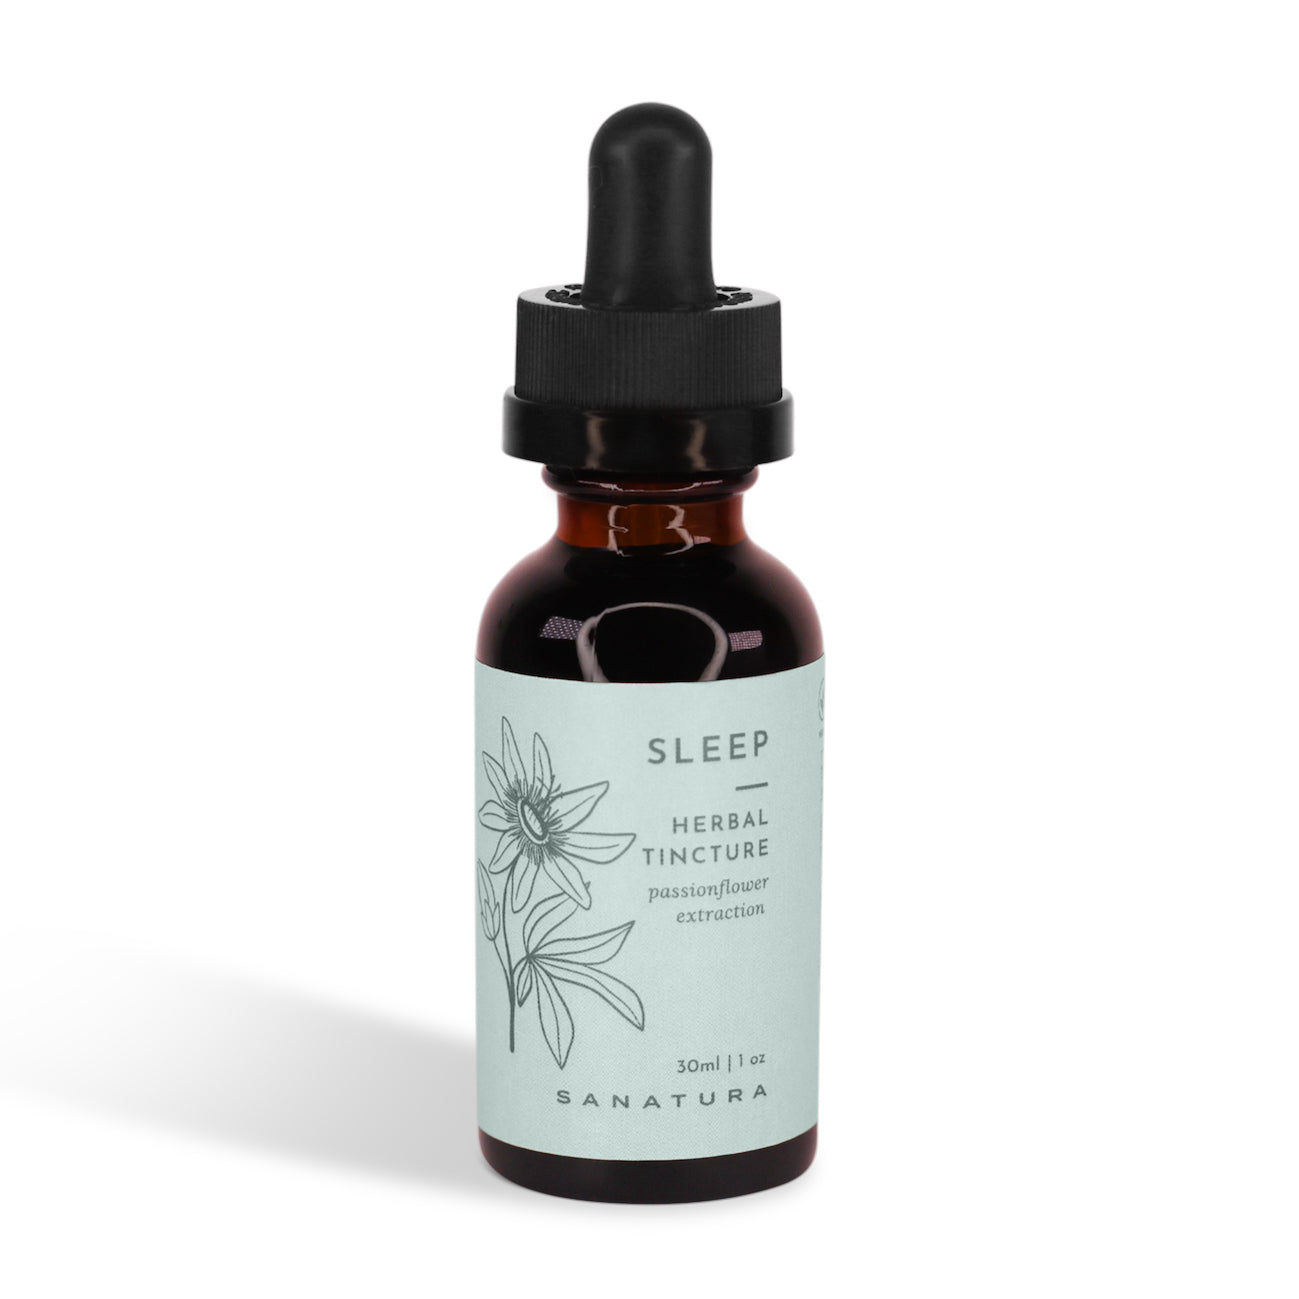 Organic Passionflower Herbal Extract Tincture for Sleep